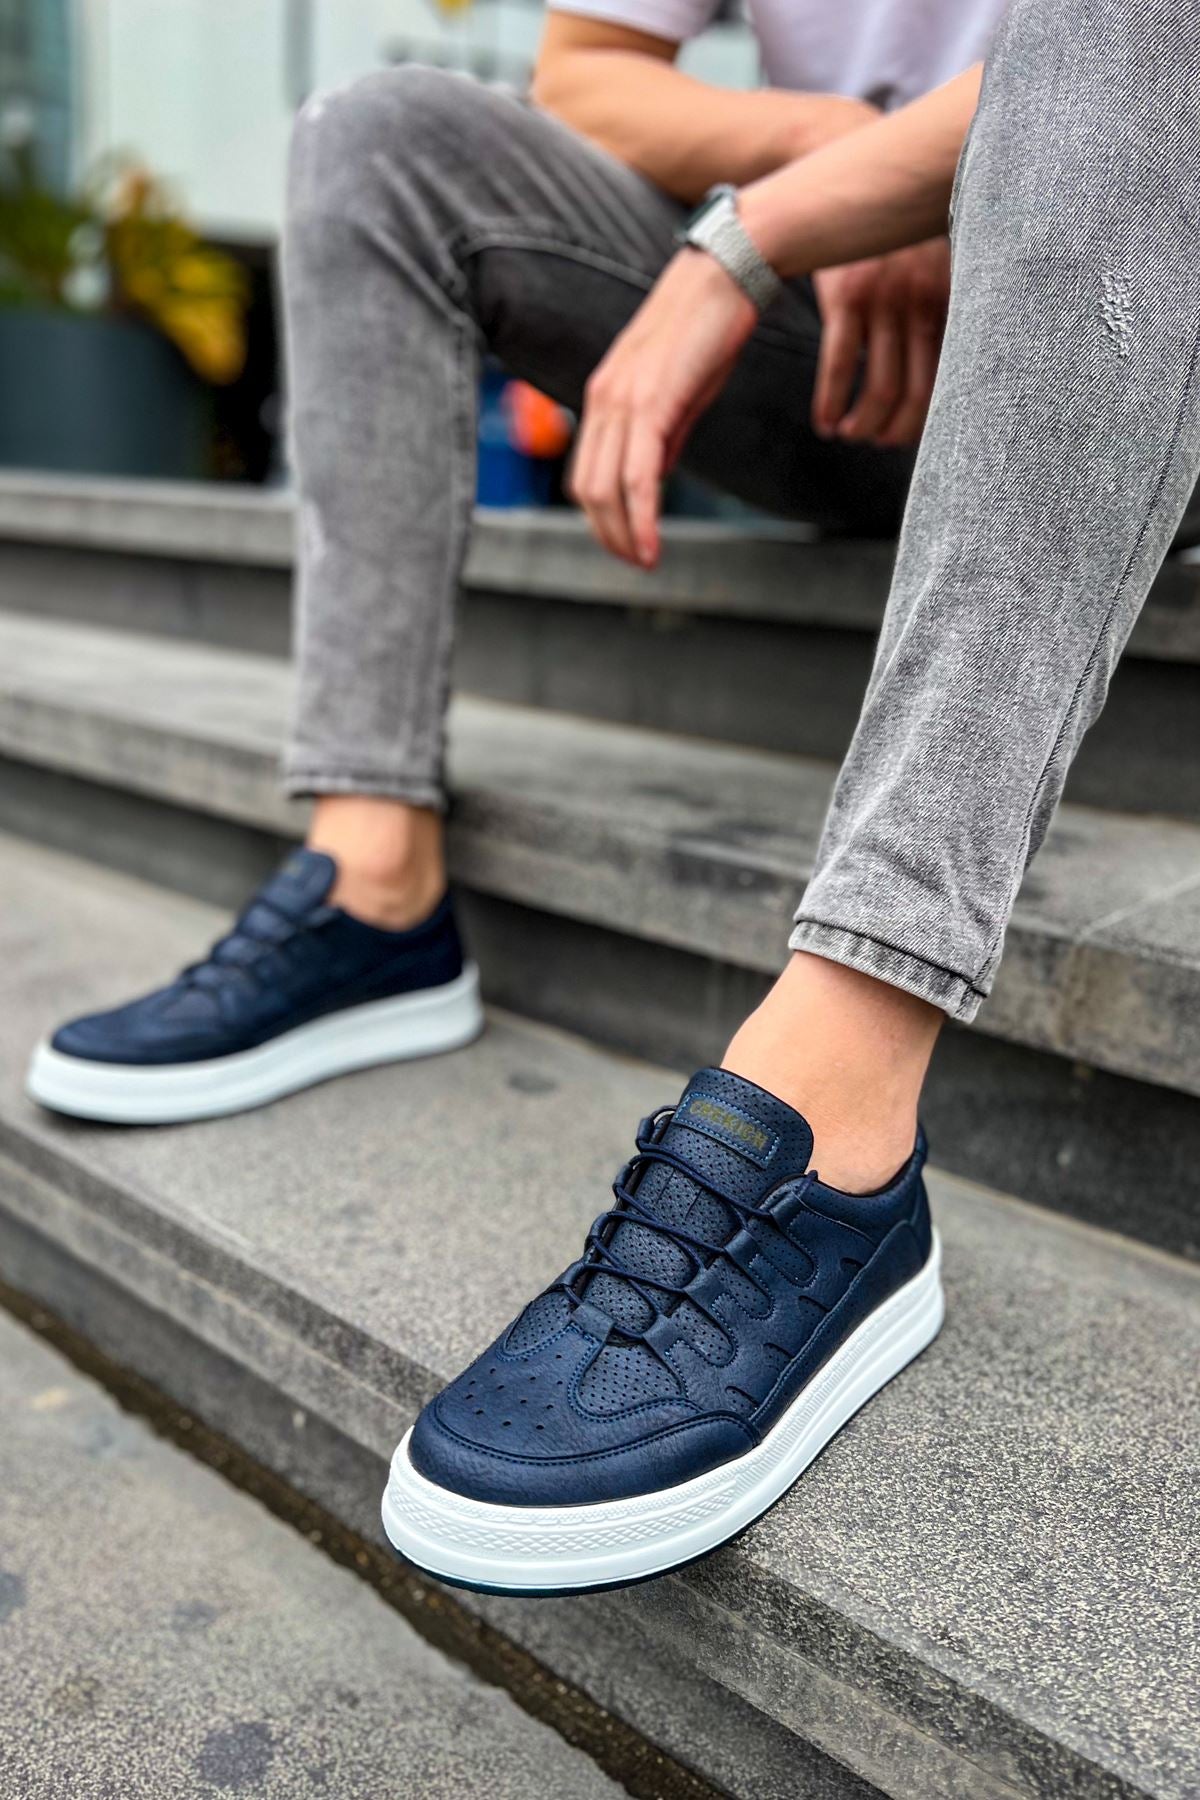 CH040 Men's Unisex Orthopedics Navy Blue-White Sole Casual Sneaker Sports Shoes - STREETMODE ™